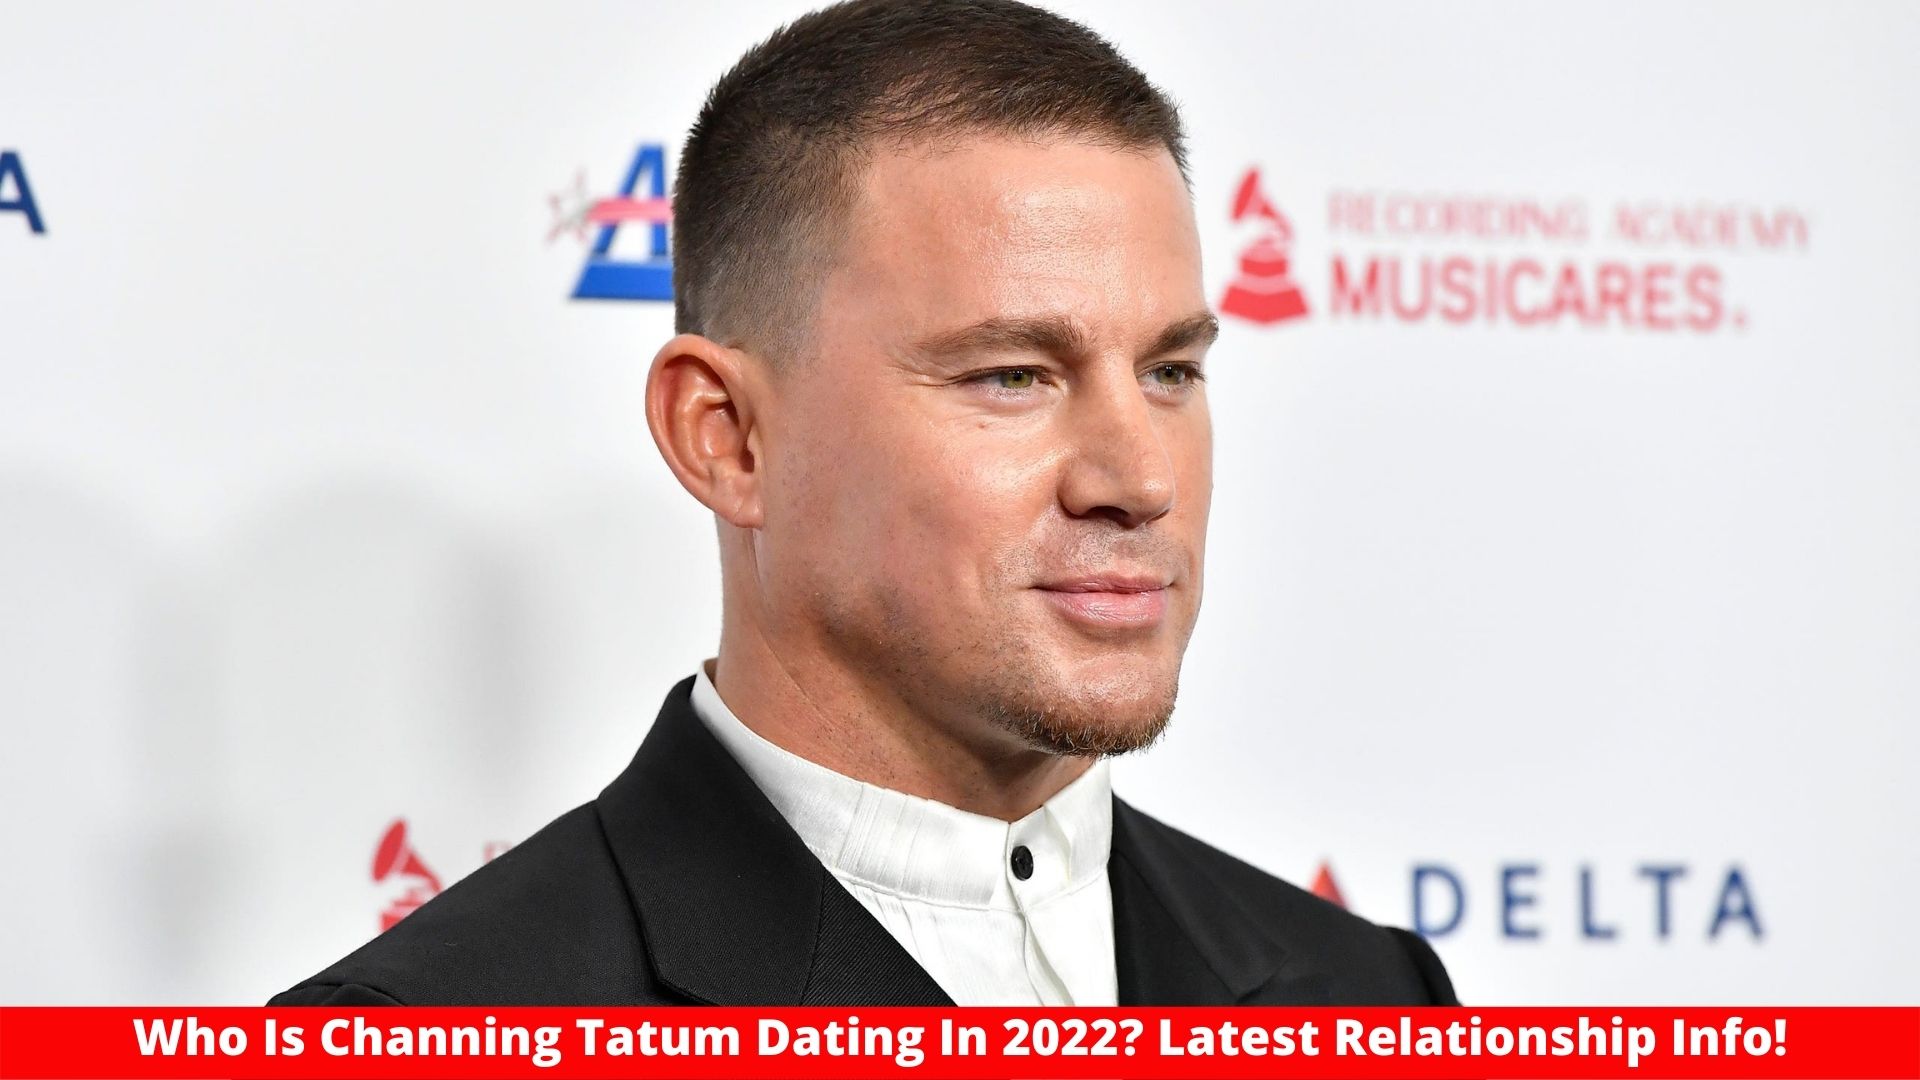 Who Is Channing Tatum Dating In 2022? Latest Relationship Info!